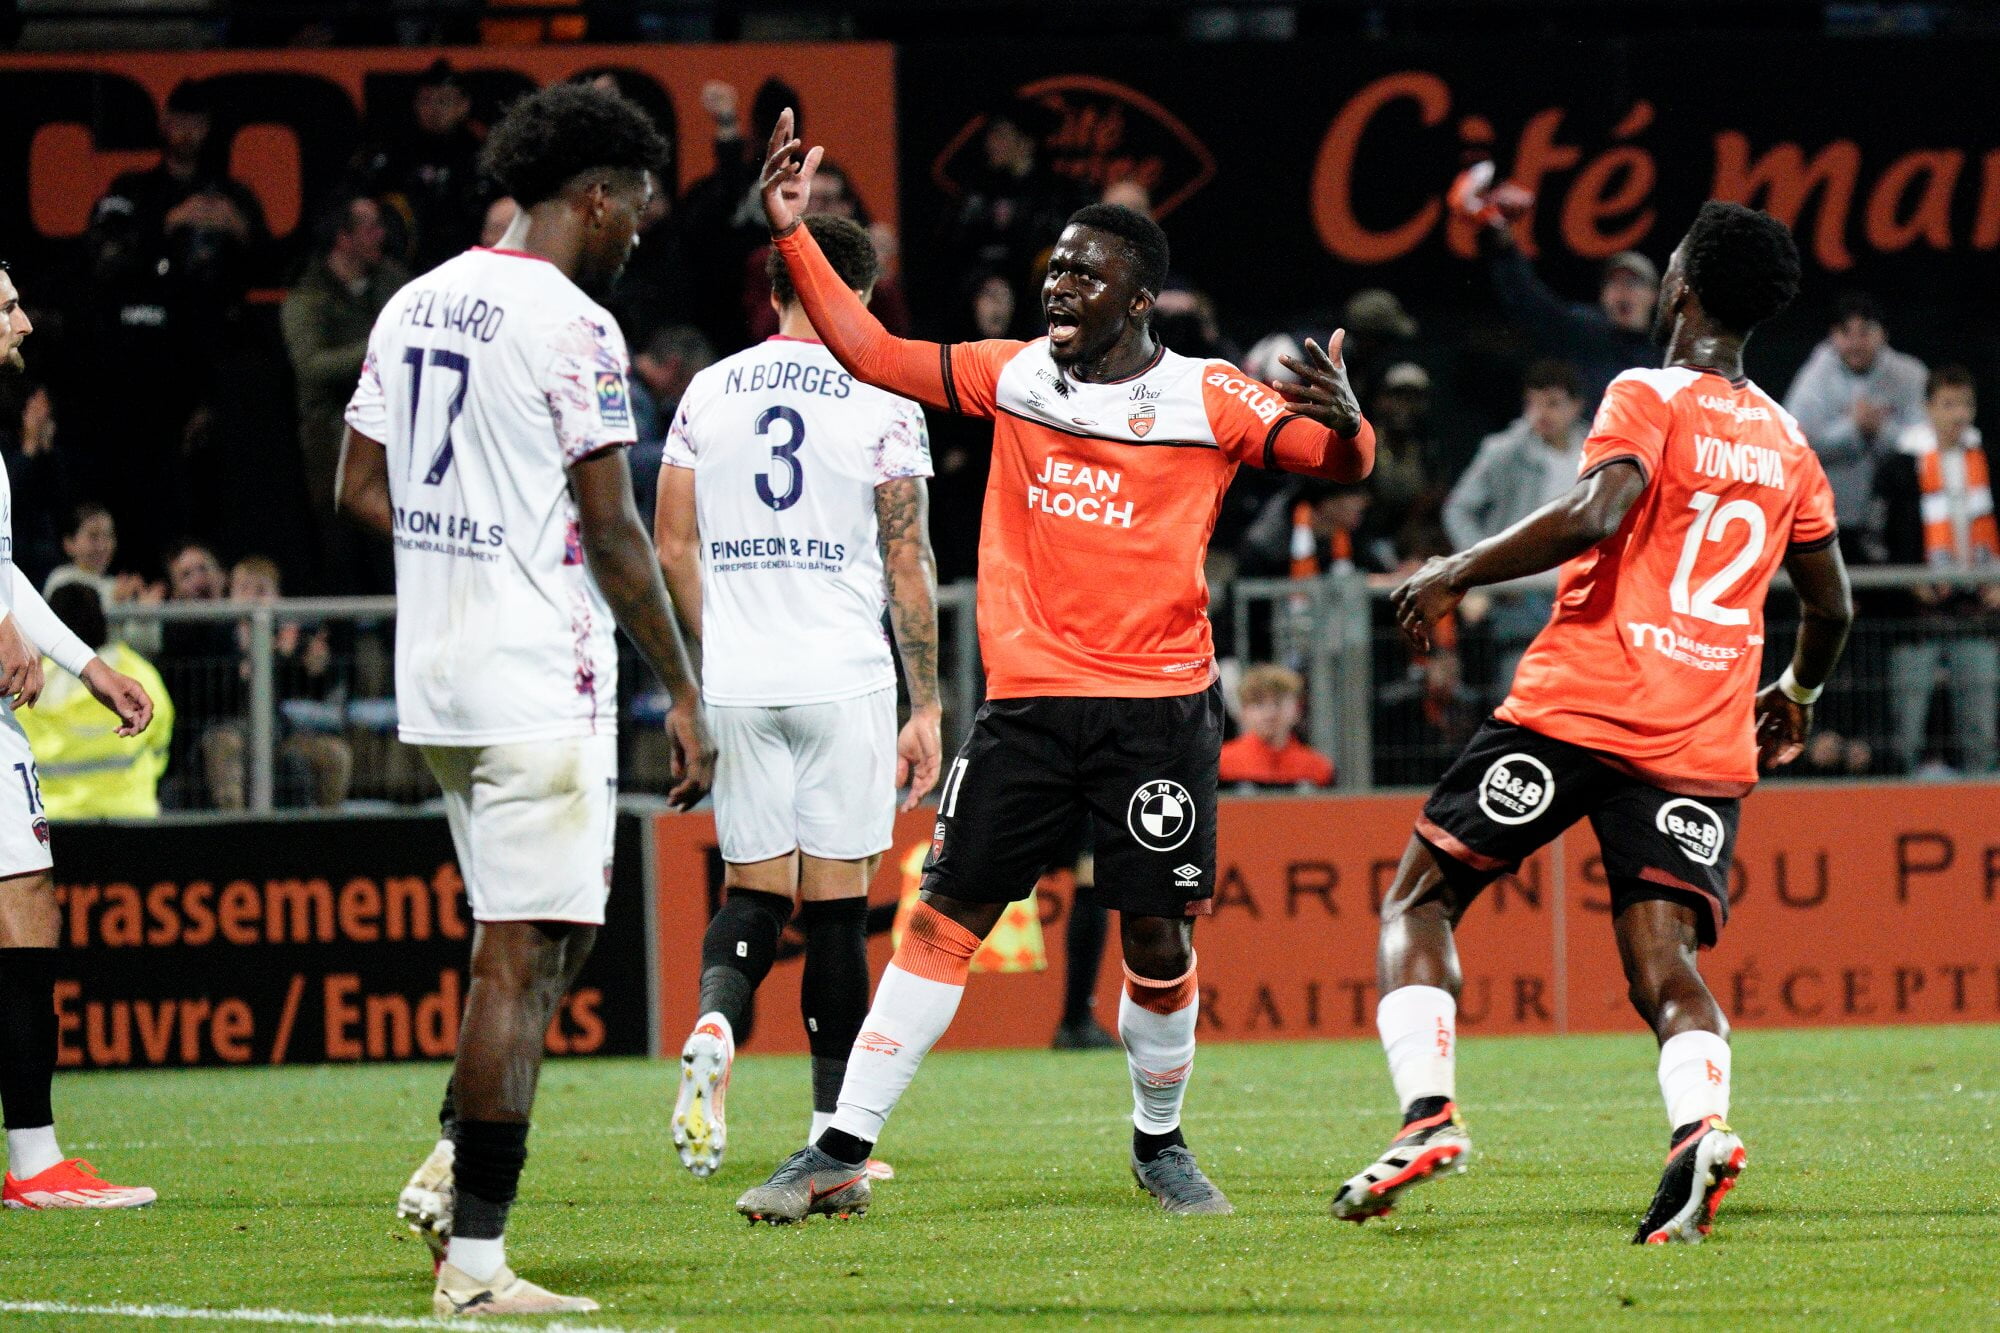 FC Lorient attacker Bamba Dieng celebrates a goal against Clermont Foot